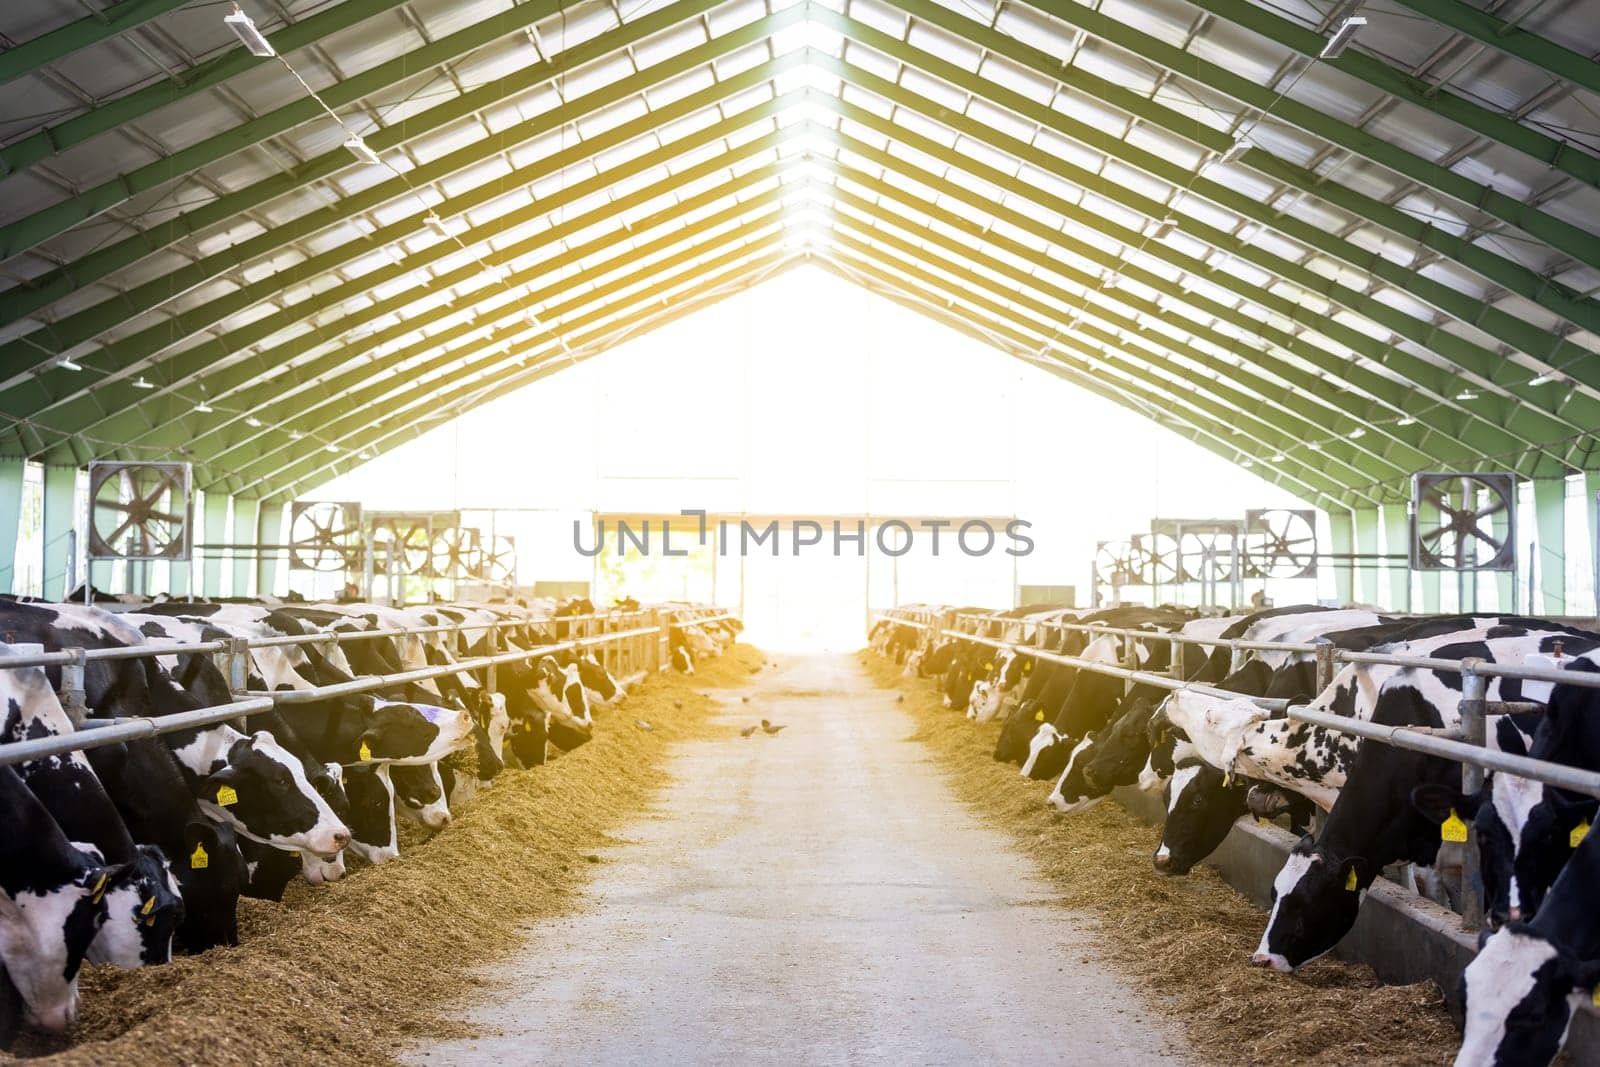 Cows in a farm, dairy cows laying on a fresh hay, concept of modern farm cowshed